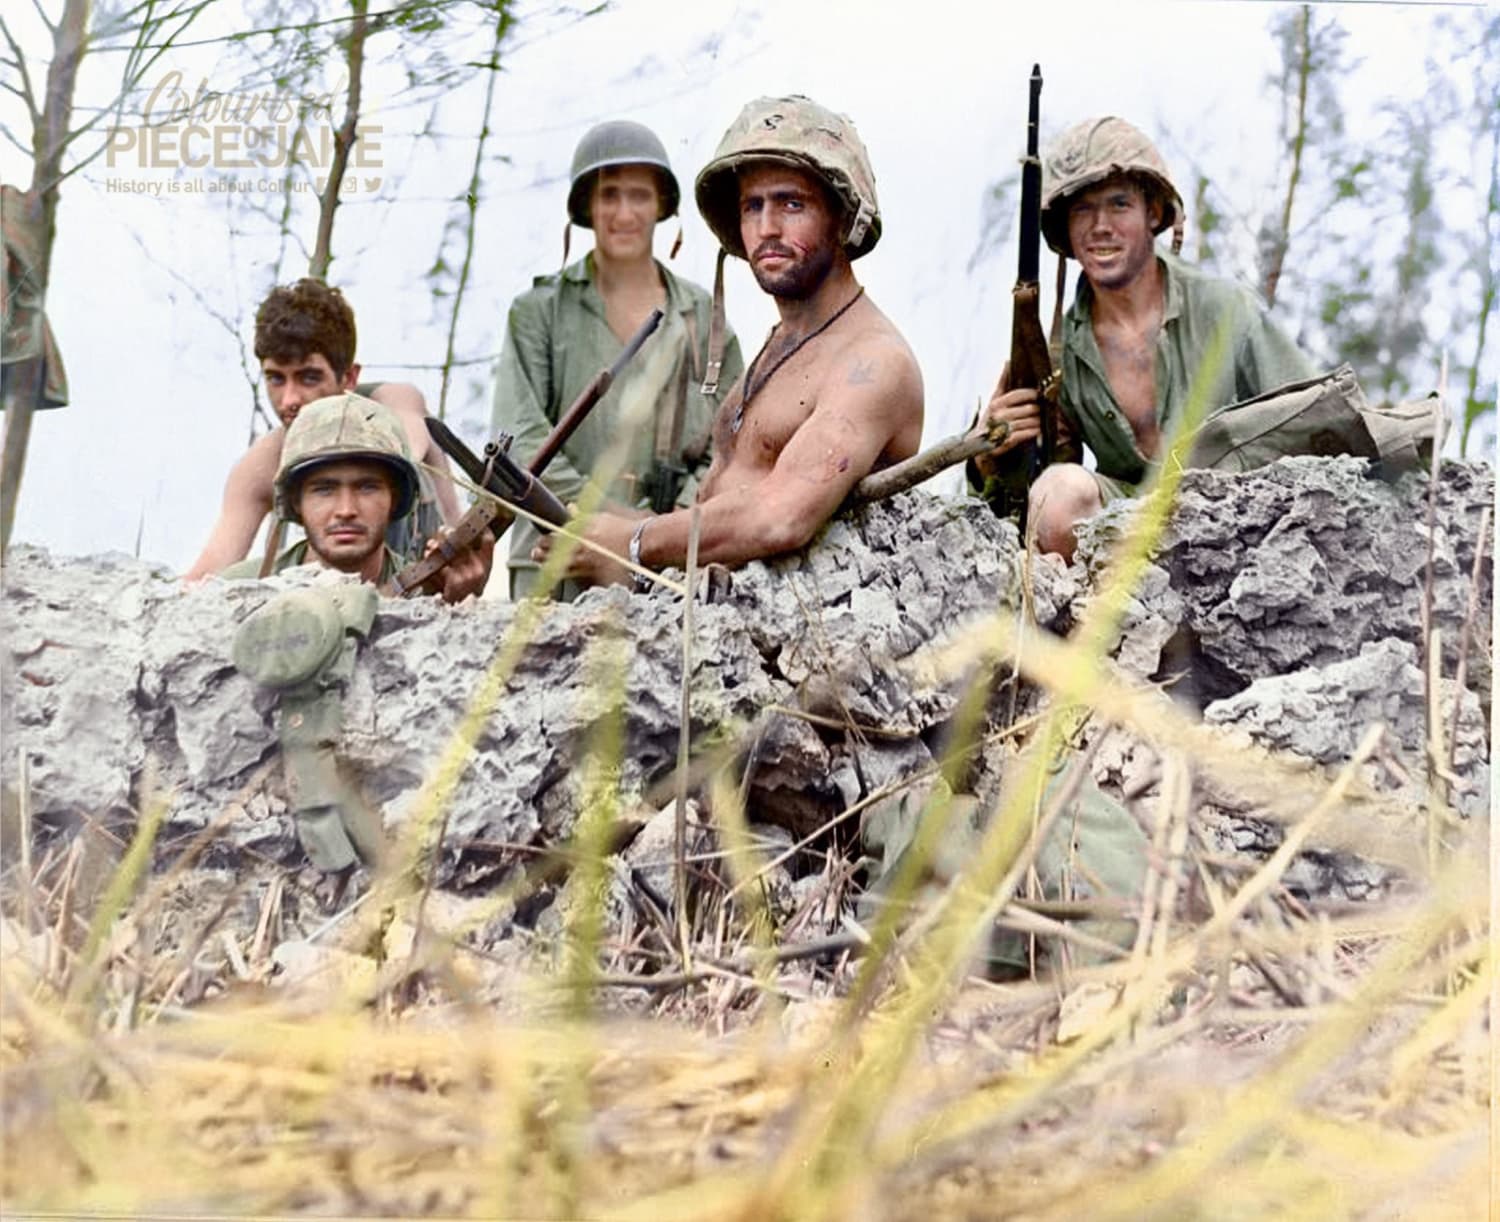 U.S. Marines pose in foxhole near front lines during the Invasion of Saipan, Mariana Islands, July 1st 1944. (Photographed by USS Indianapolis photographer, National Archives.)